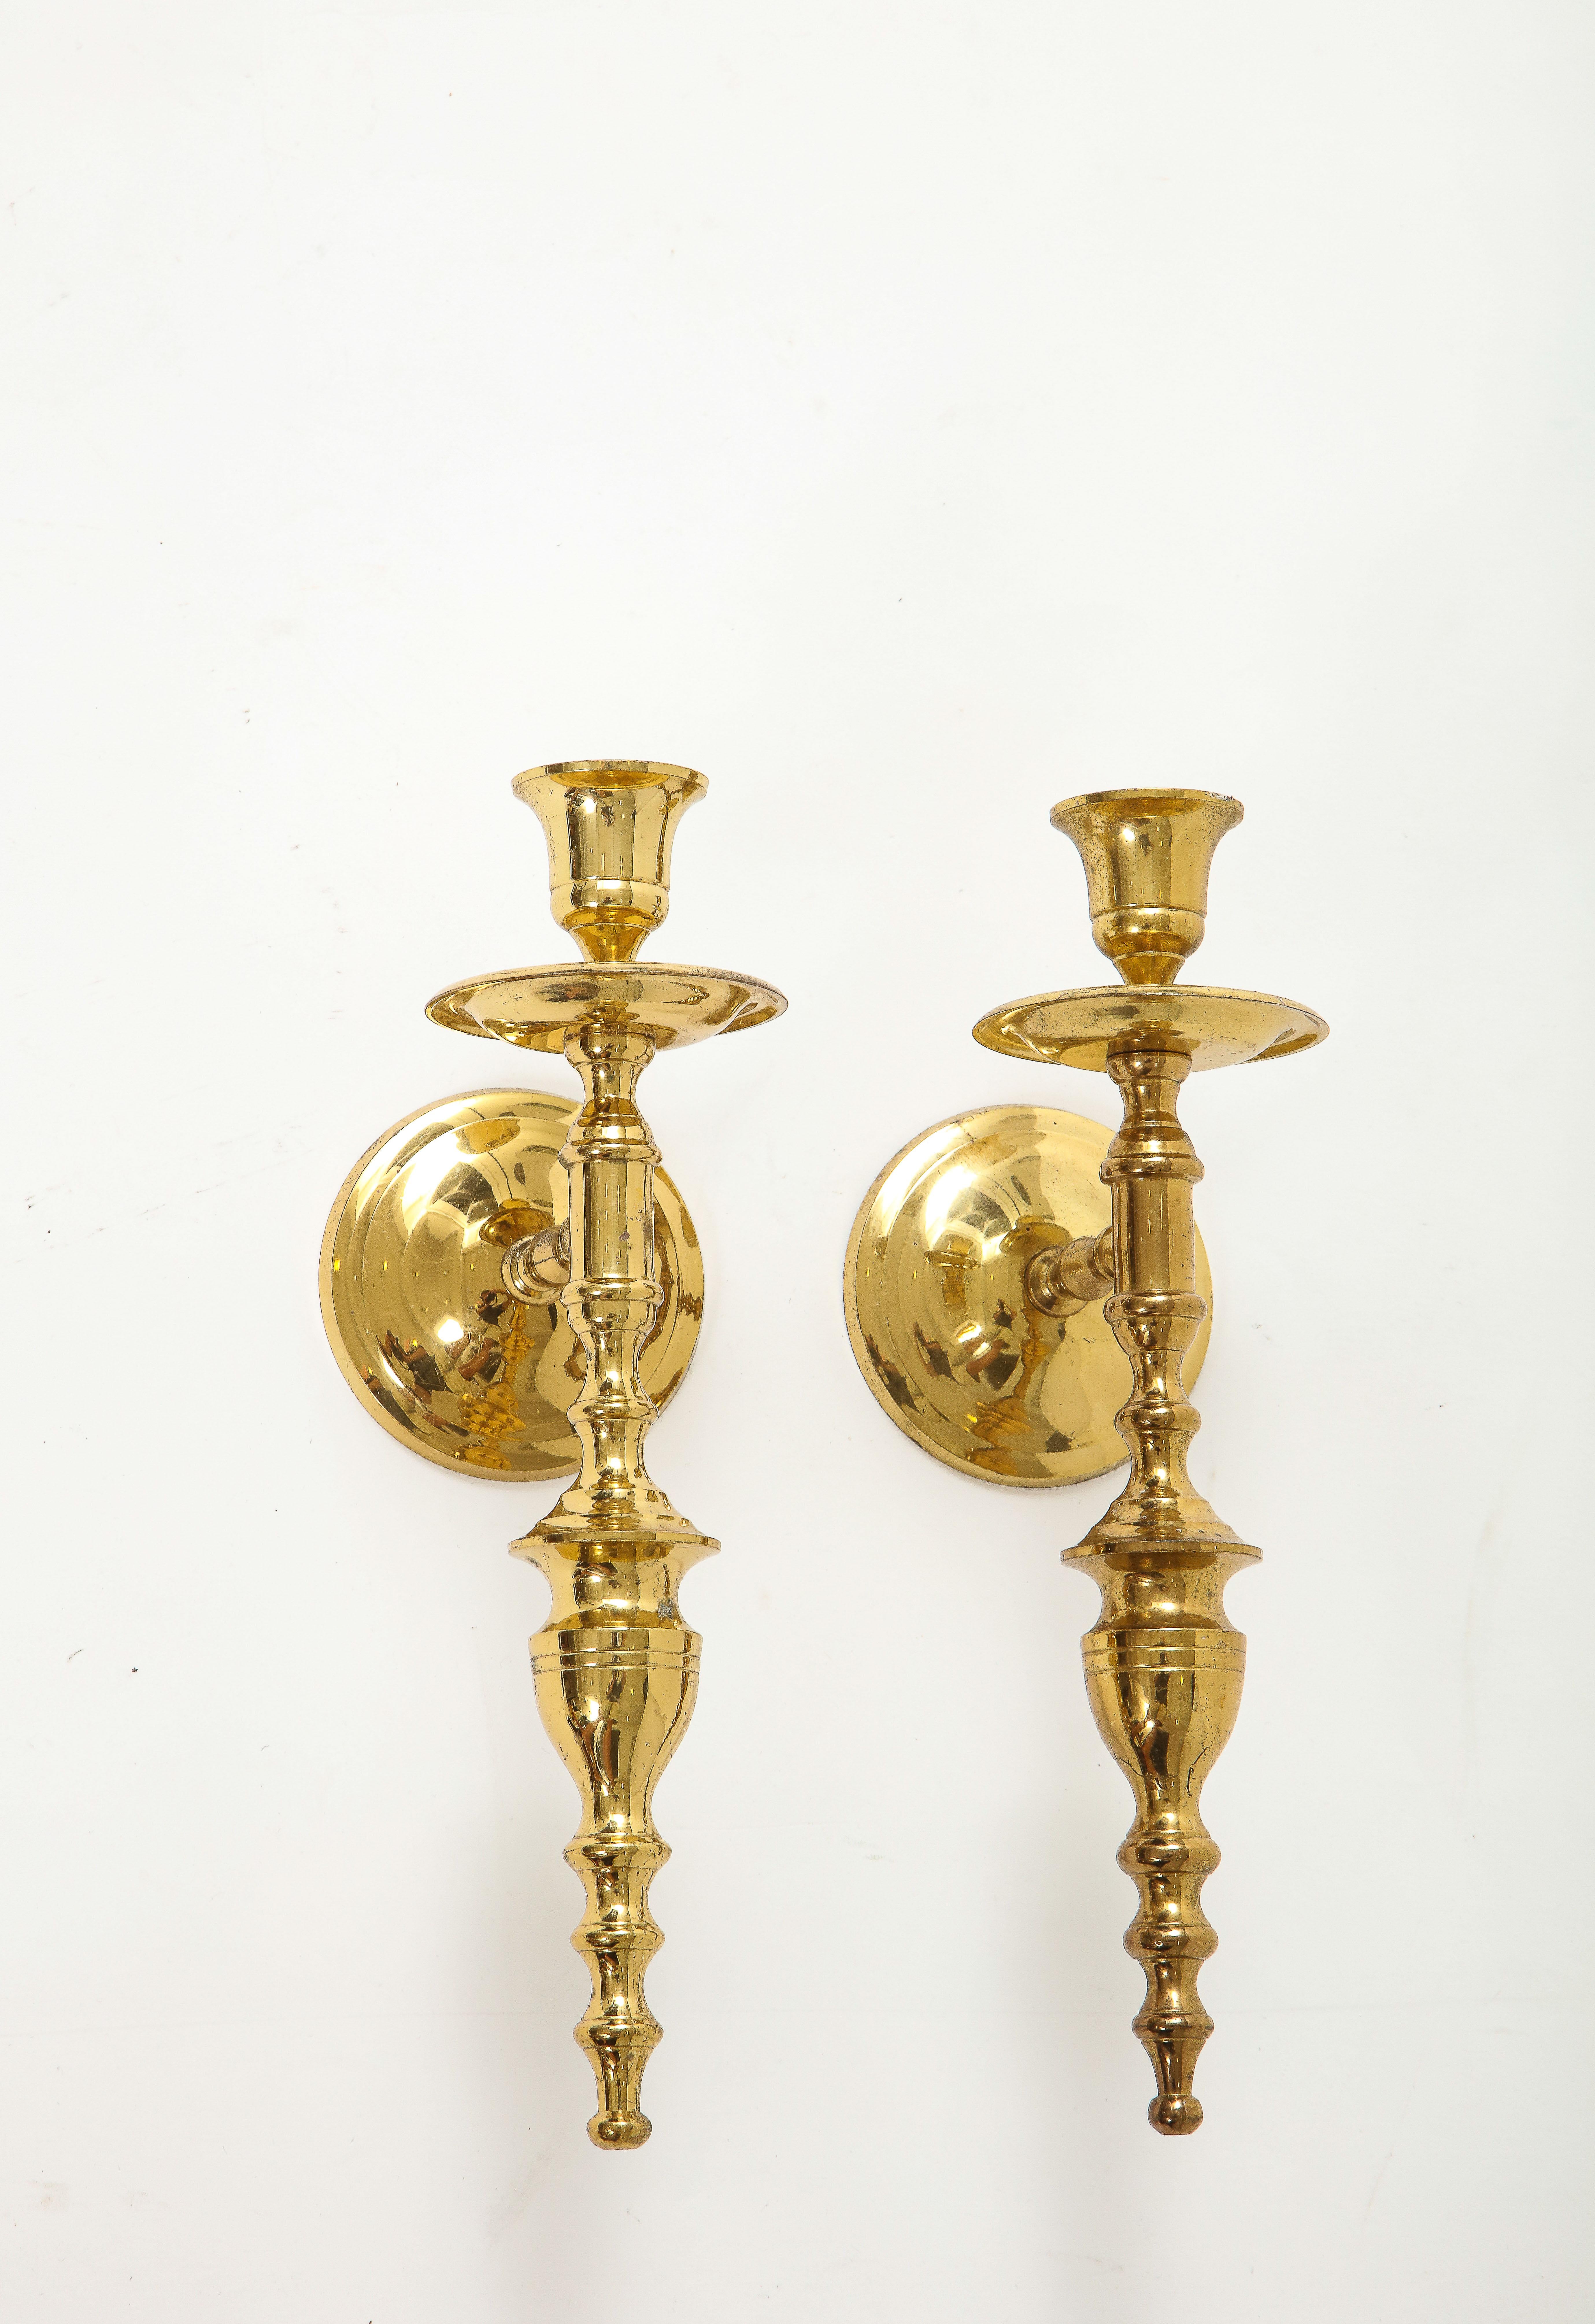 Parzinger Style Brass Candle Sconces In Good Condition For Sale In New York, NY